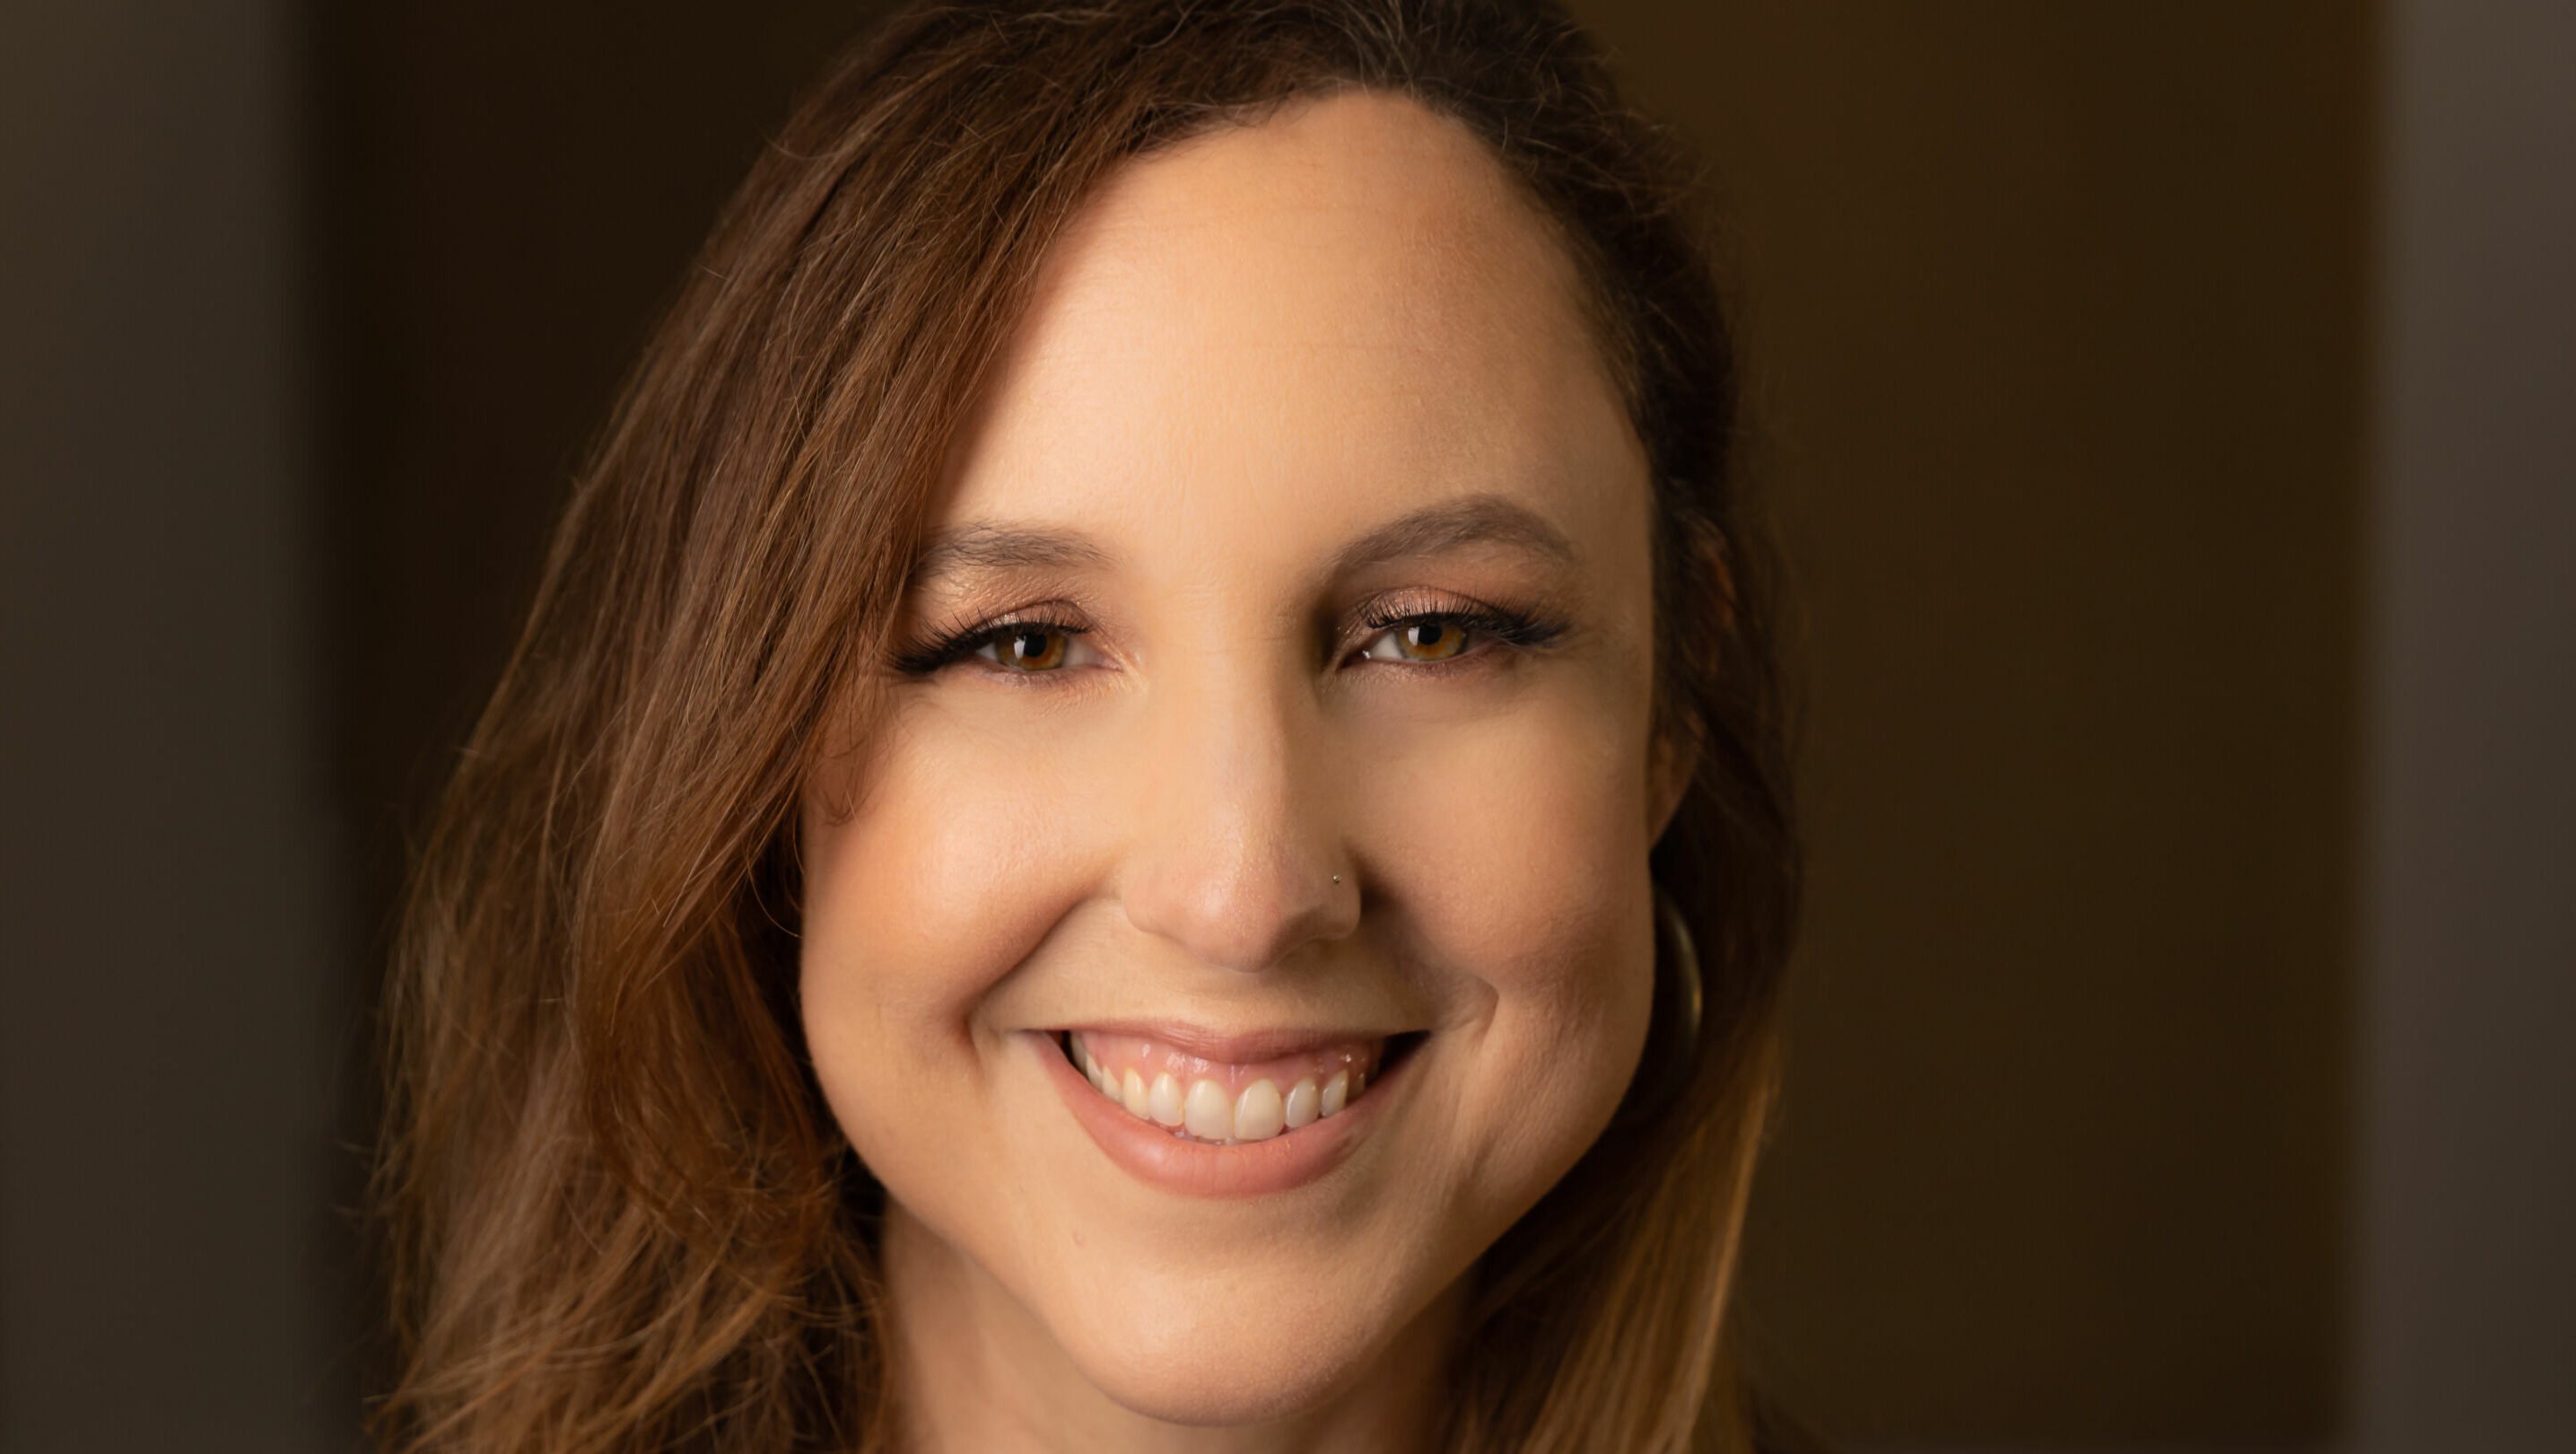 Elena Awbrey named Executive Manager at YMU Music in the US – Music Business Worldwide